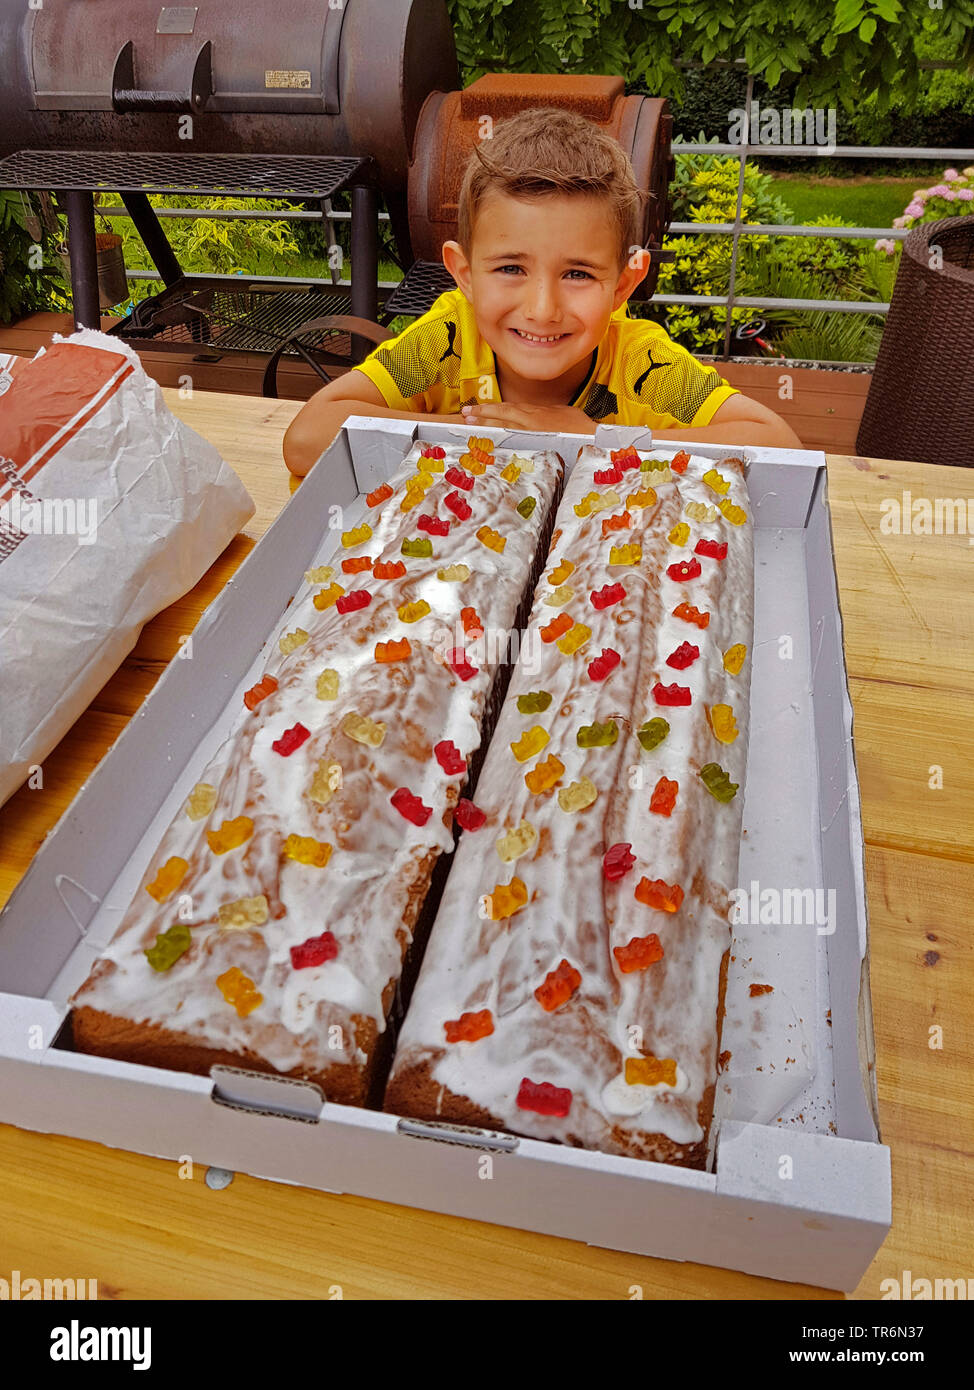 littler boy in BVB tricot with his birthday cake Stock Photo